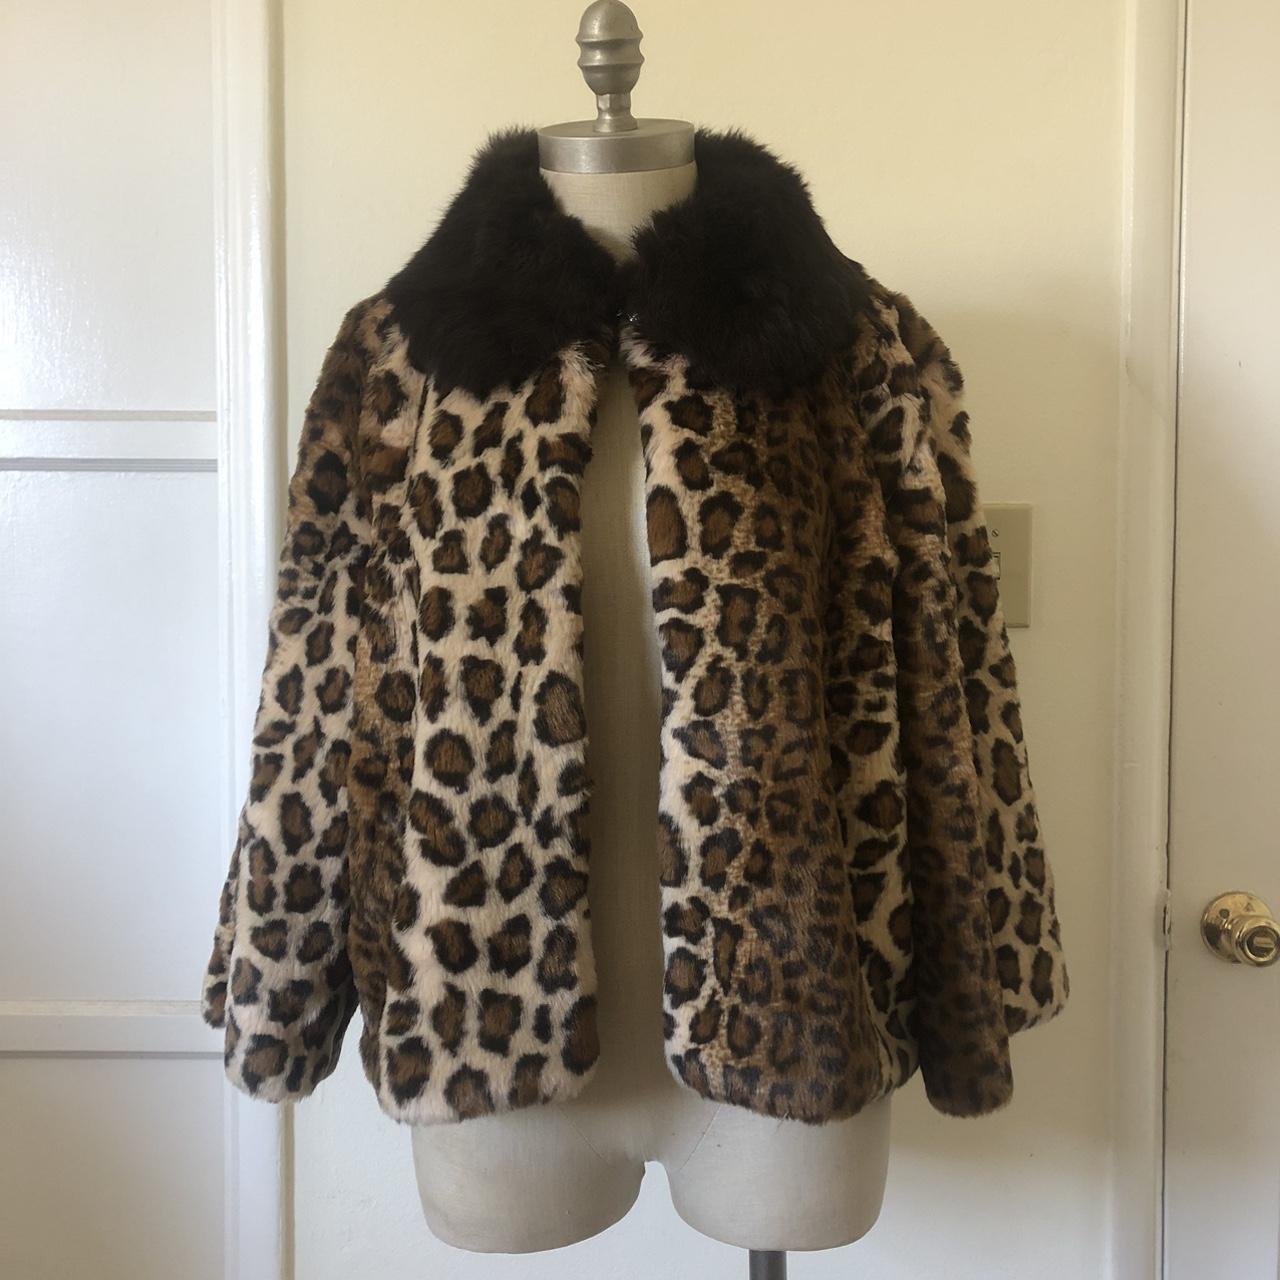 Calling all MOB WIVES 🚨 Beautiful vintage late 90s... - Depop